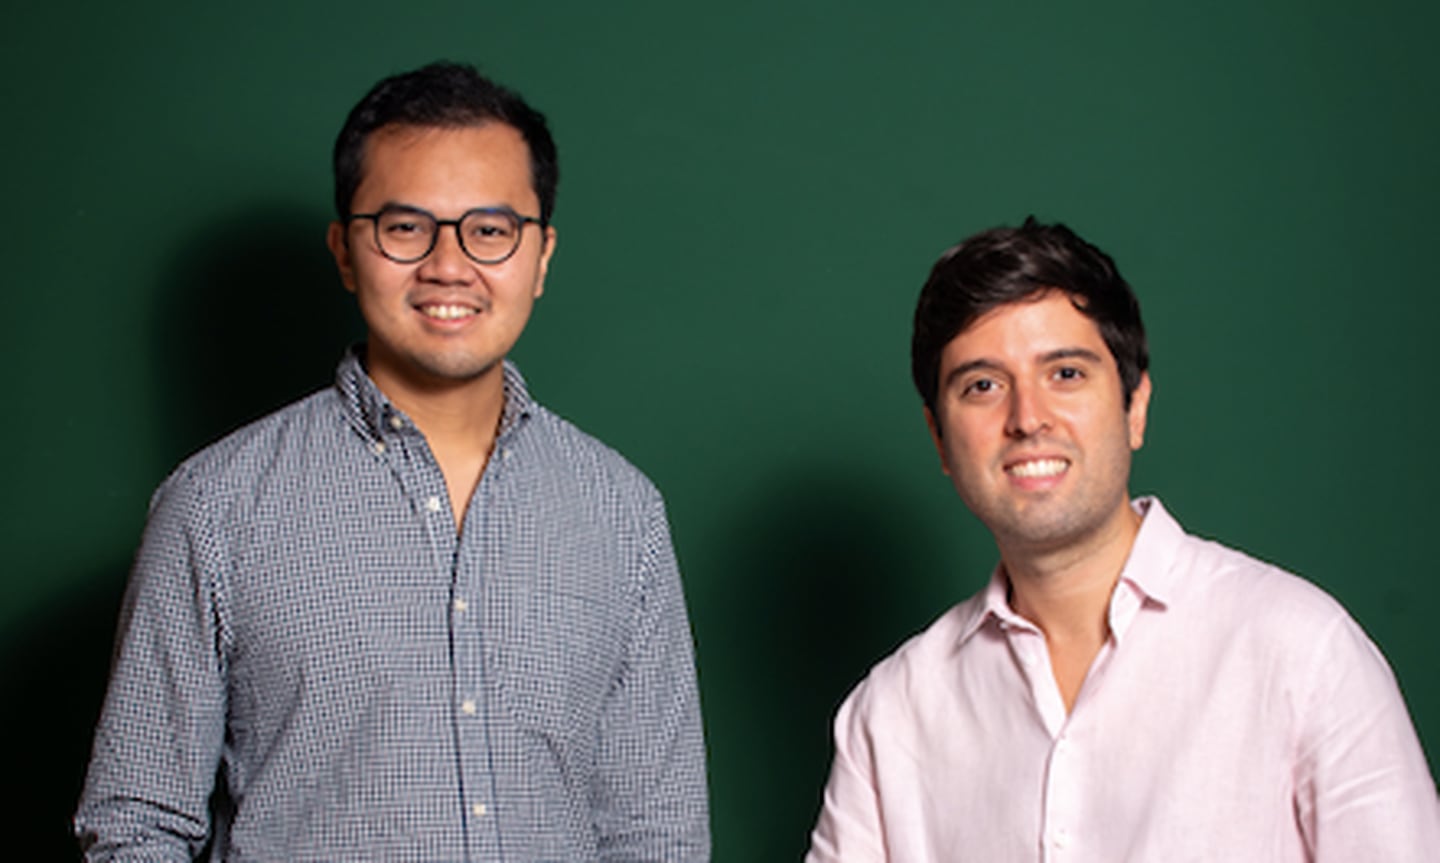 Nico Barawid, CEO of Casai (left), and Thomaz Guz, CEO of Nomah led the operation of the company resulting from the merger of their startups.